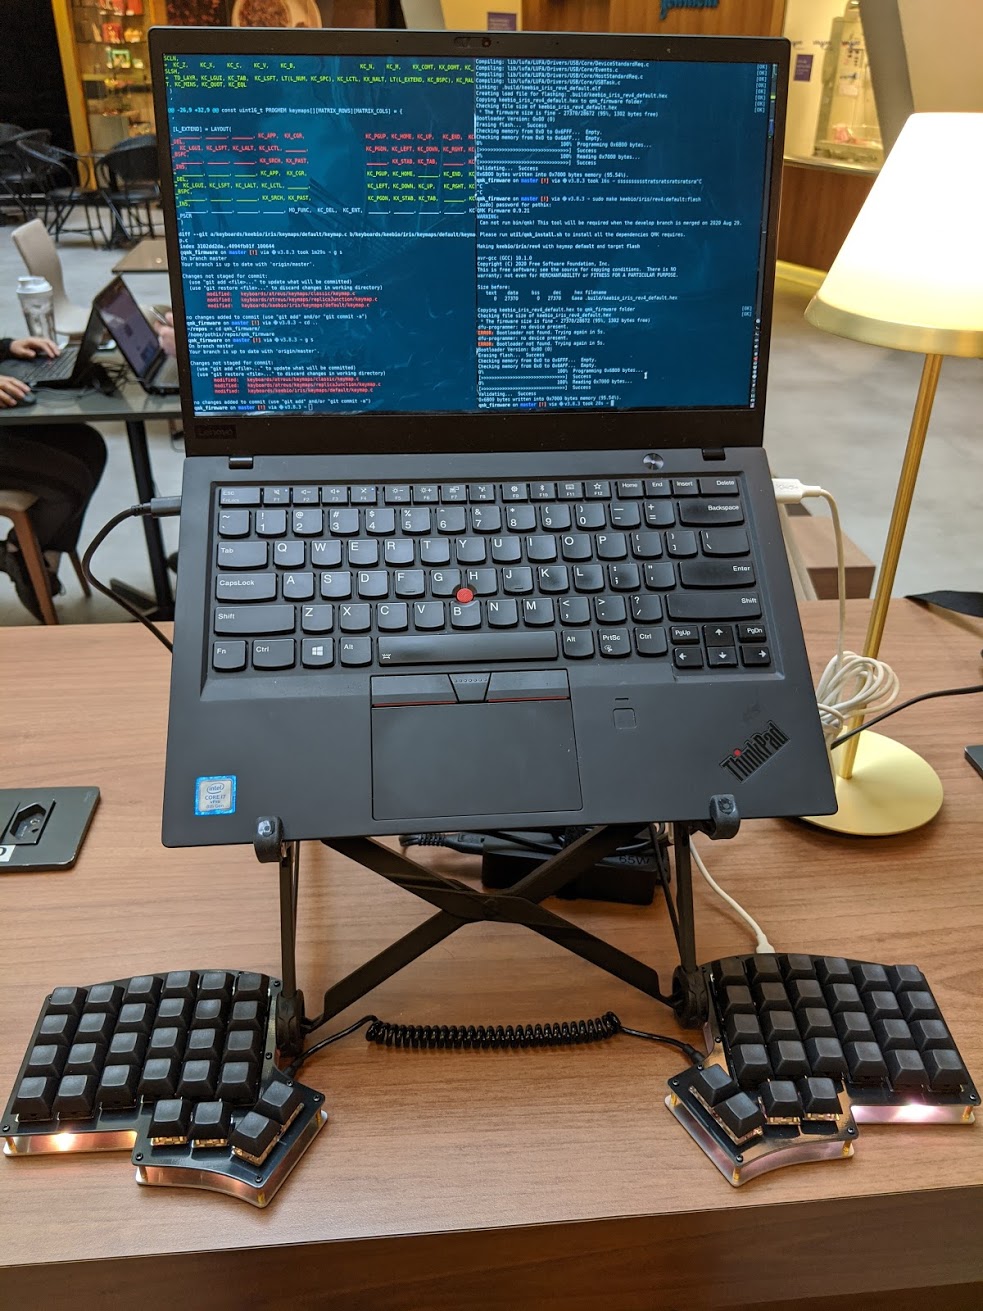 The laptop mounted on a Roost stand and the keyboard below. The keyboard showing an yellow LED color